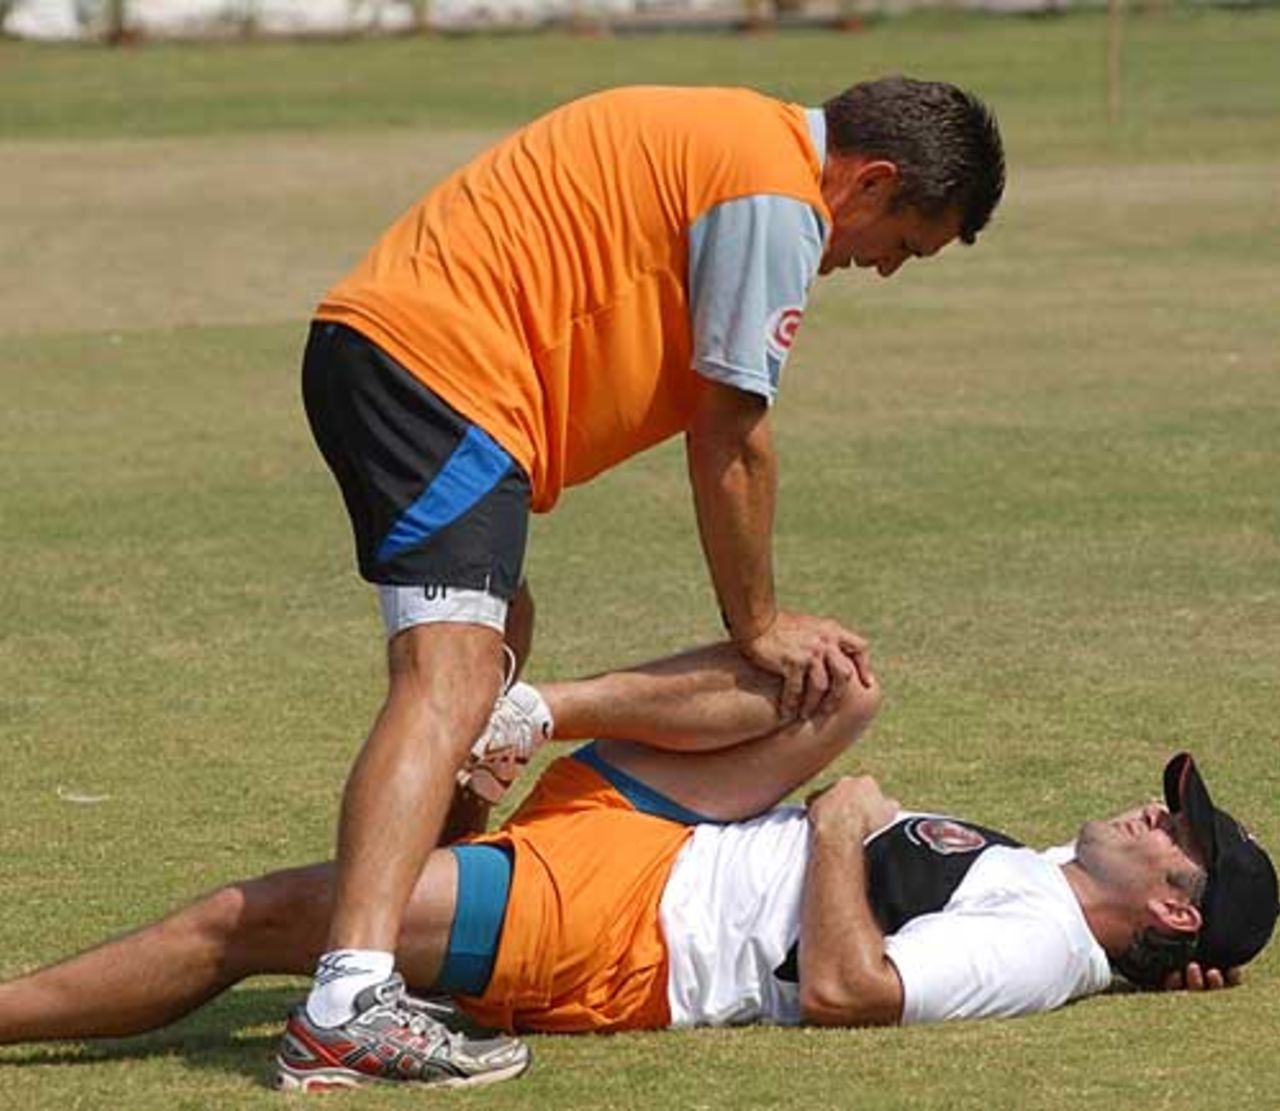 Nathan Astle does some stretches during training, Mumbai, November 19, 2007